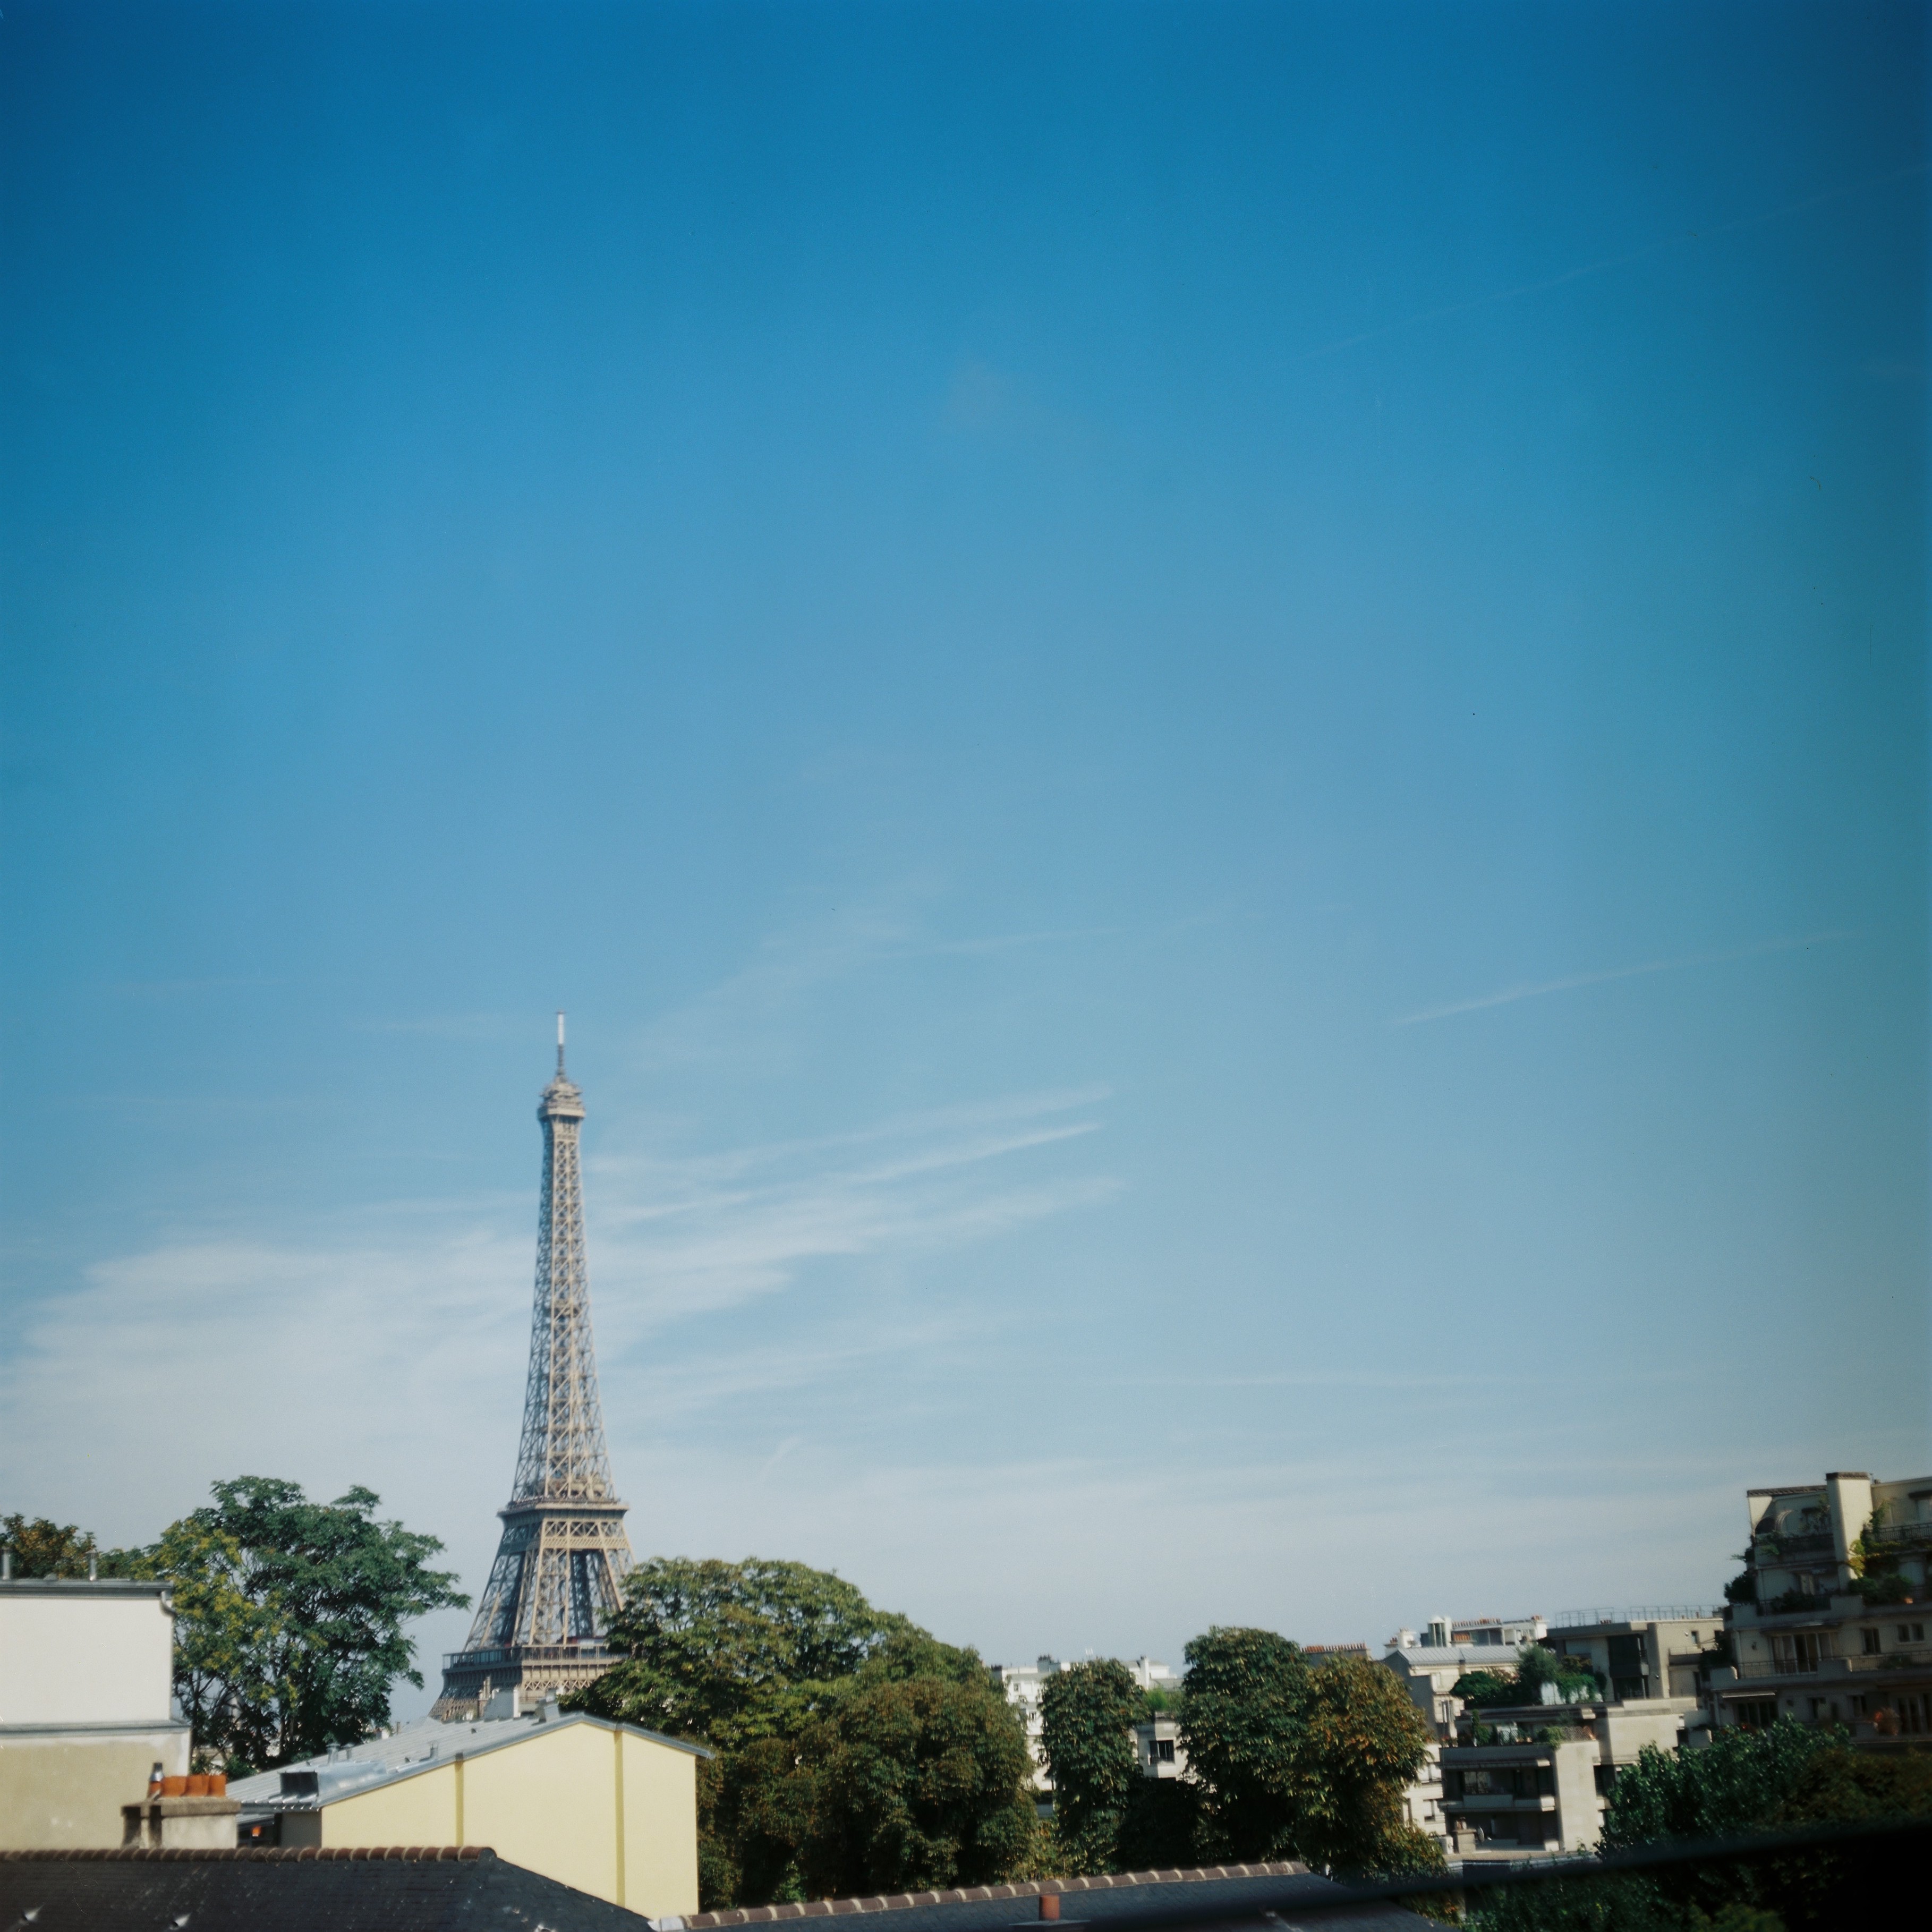 view of the eiffel tower from the gardens at the maison de balzac in the 16th arrondissement